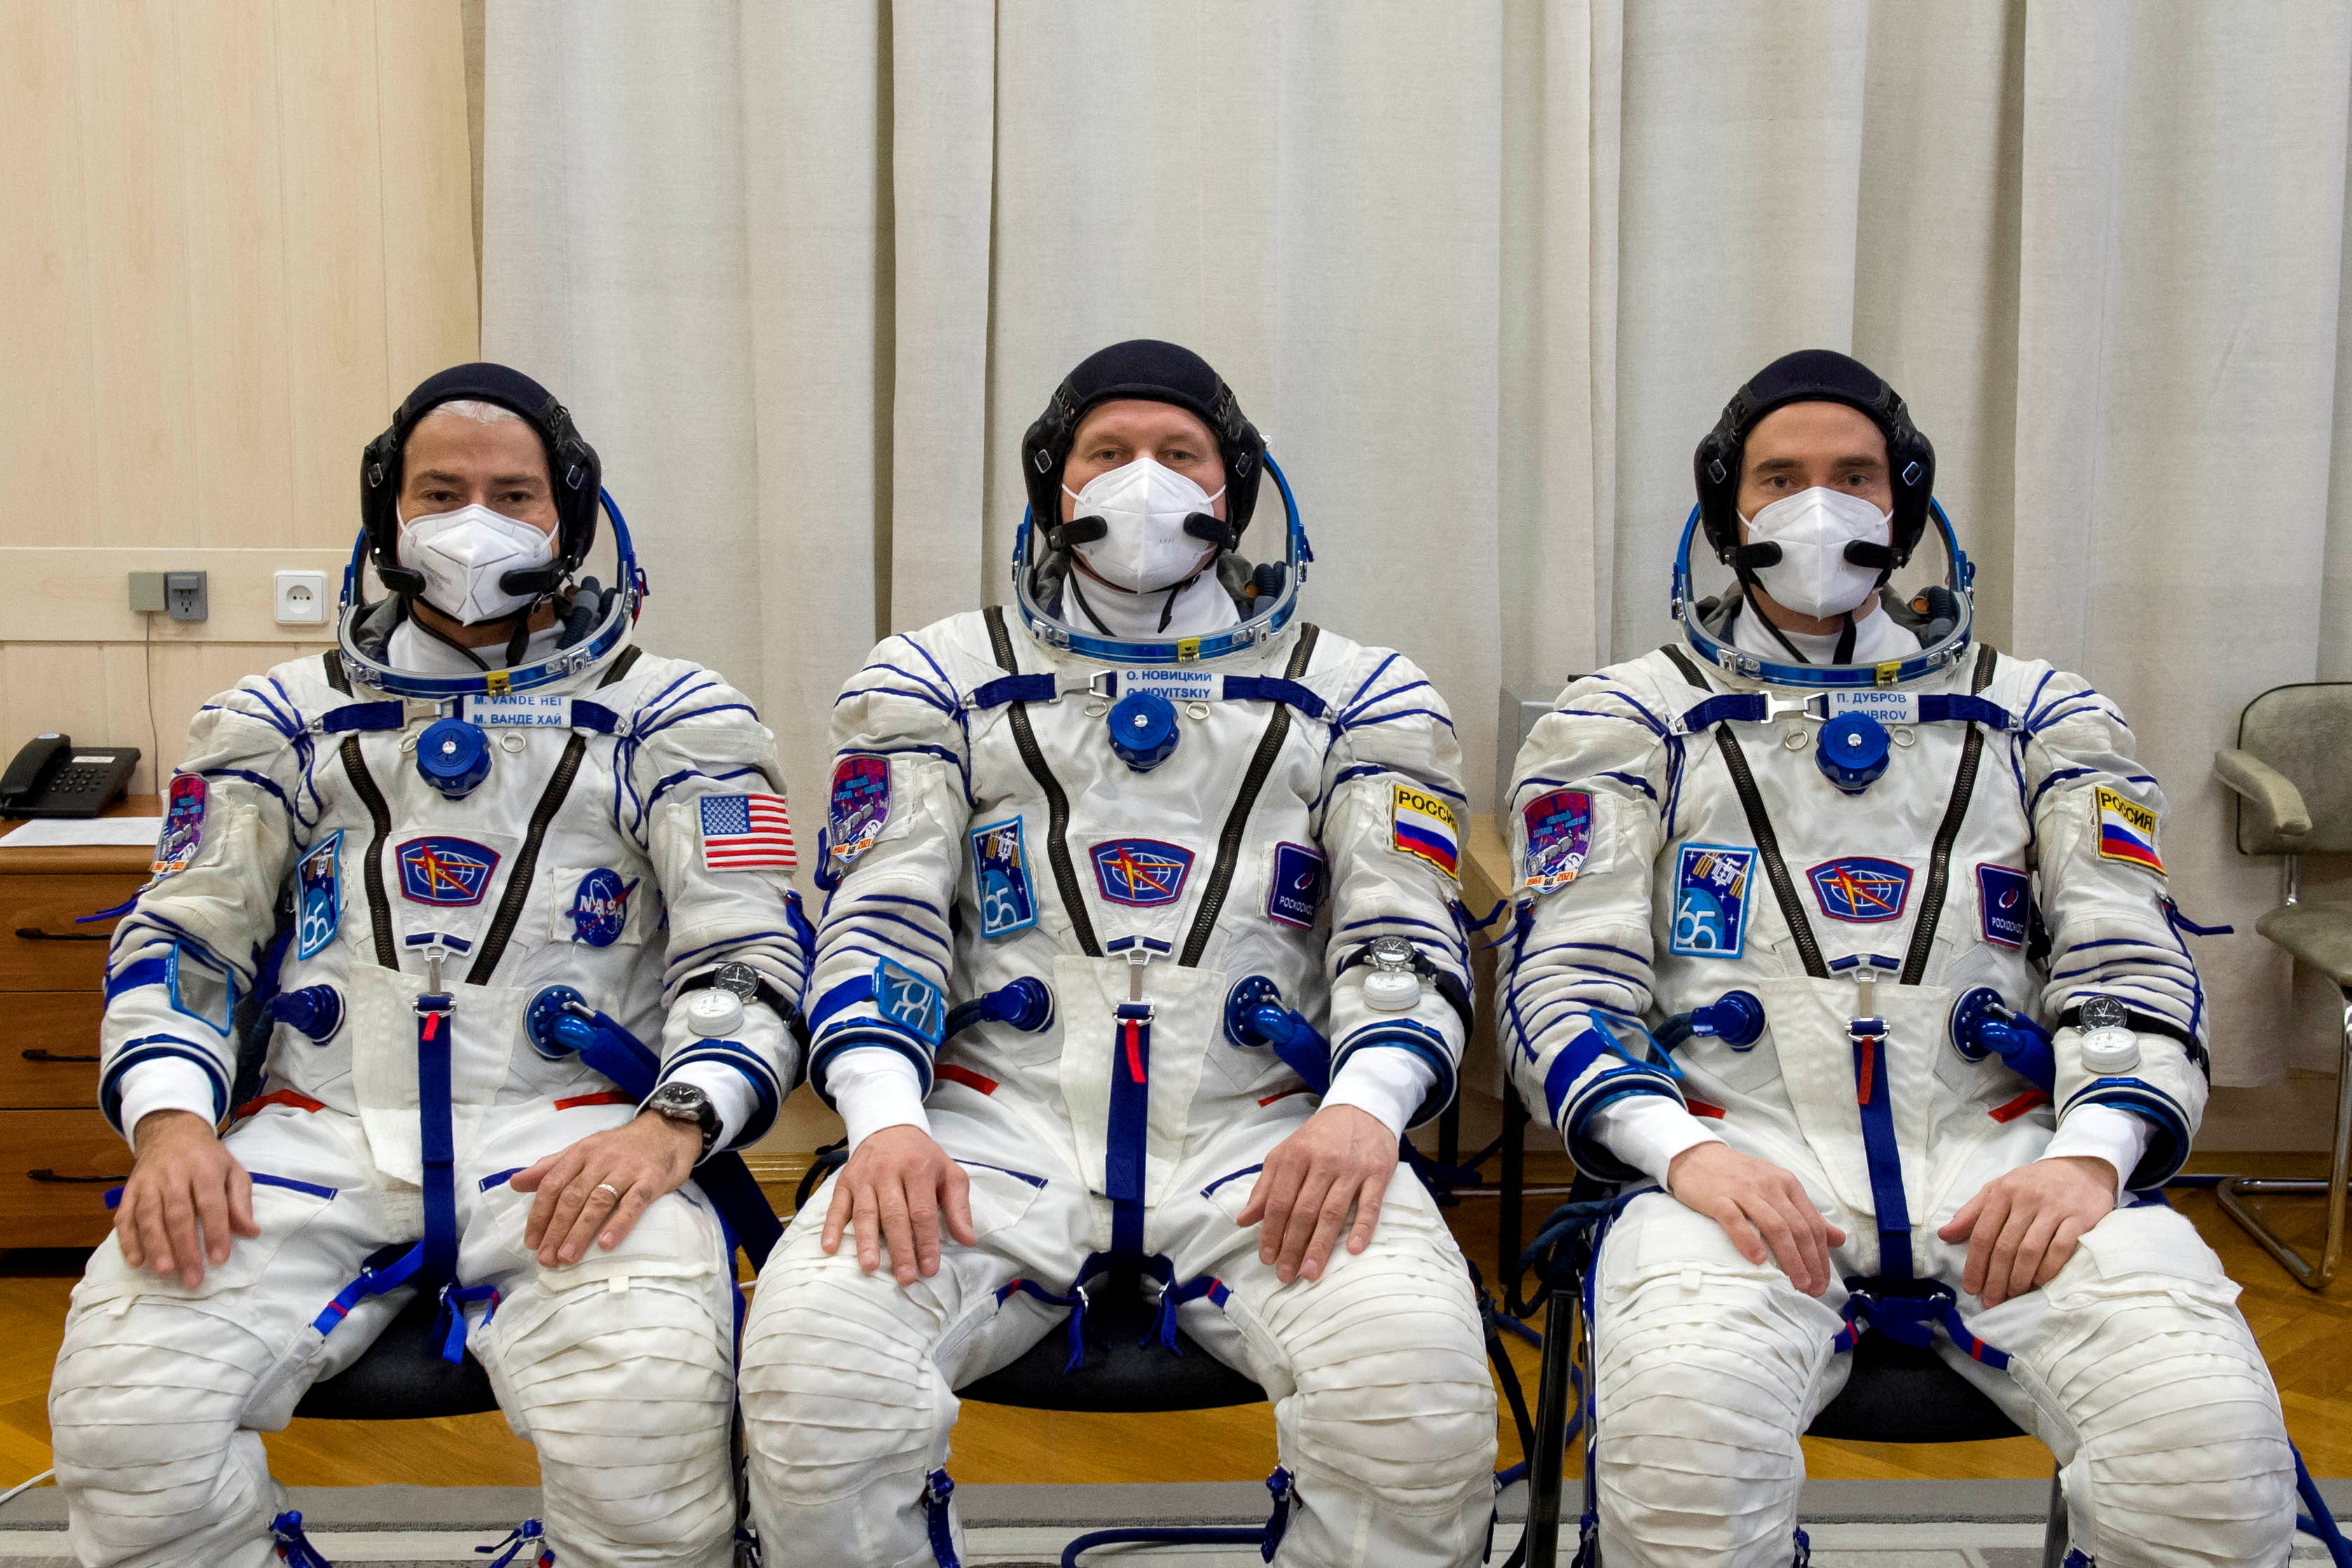 FILE PHOTO: International Space Station (ISS) crew members Mark Vandy of NASA, and astronauts Oleg Novitsky and Pyotr Dobrov of Roscosmos while out in spacesuit at the Baikonur Cosmodrome.  Irina Spector / GCTC / Roscosmos / Handout via Reuters